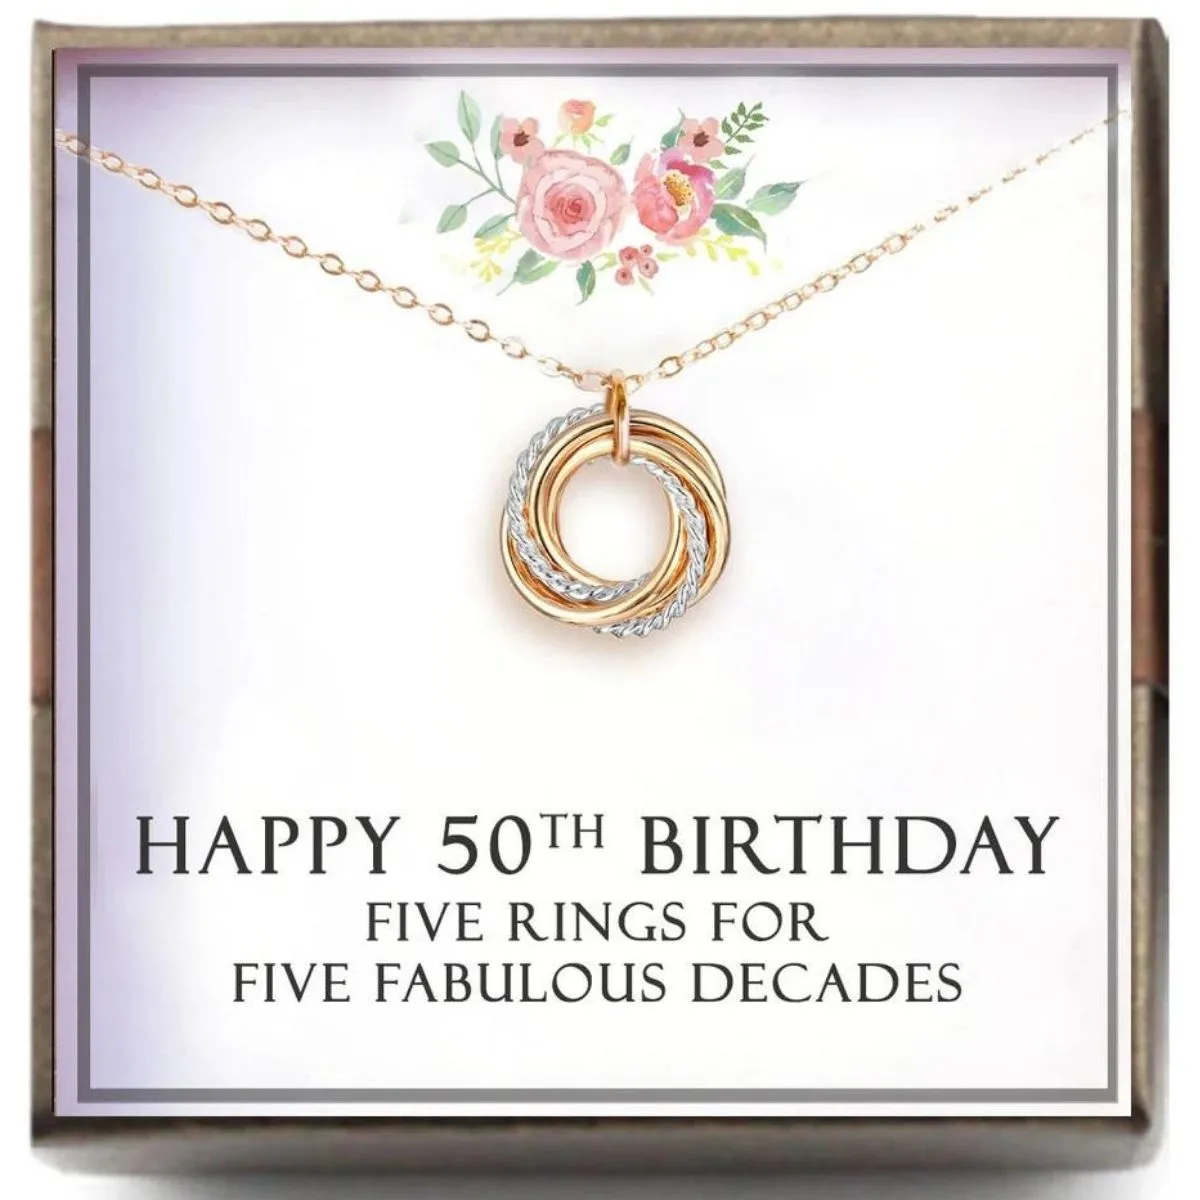 happy 50th birthday: five rings for five fabulous decades